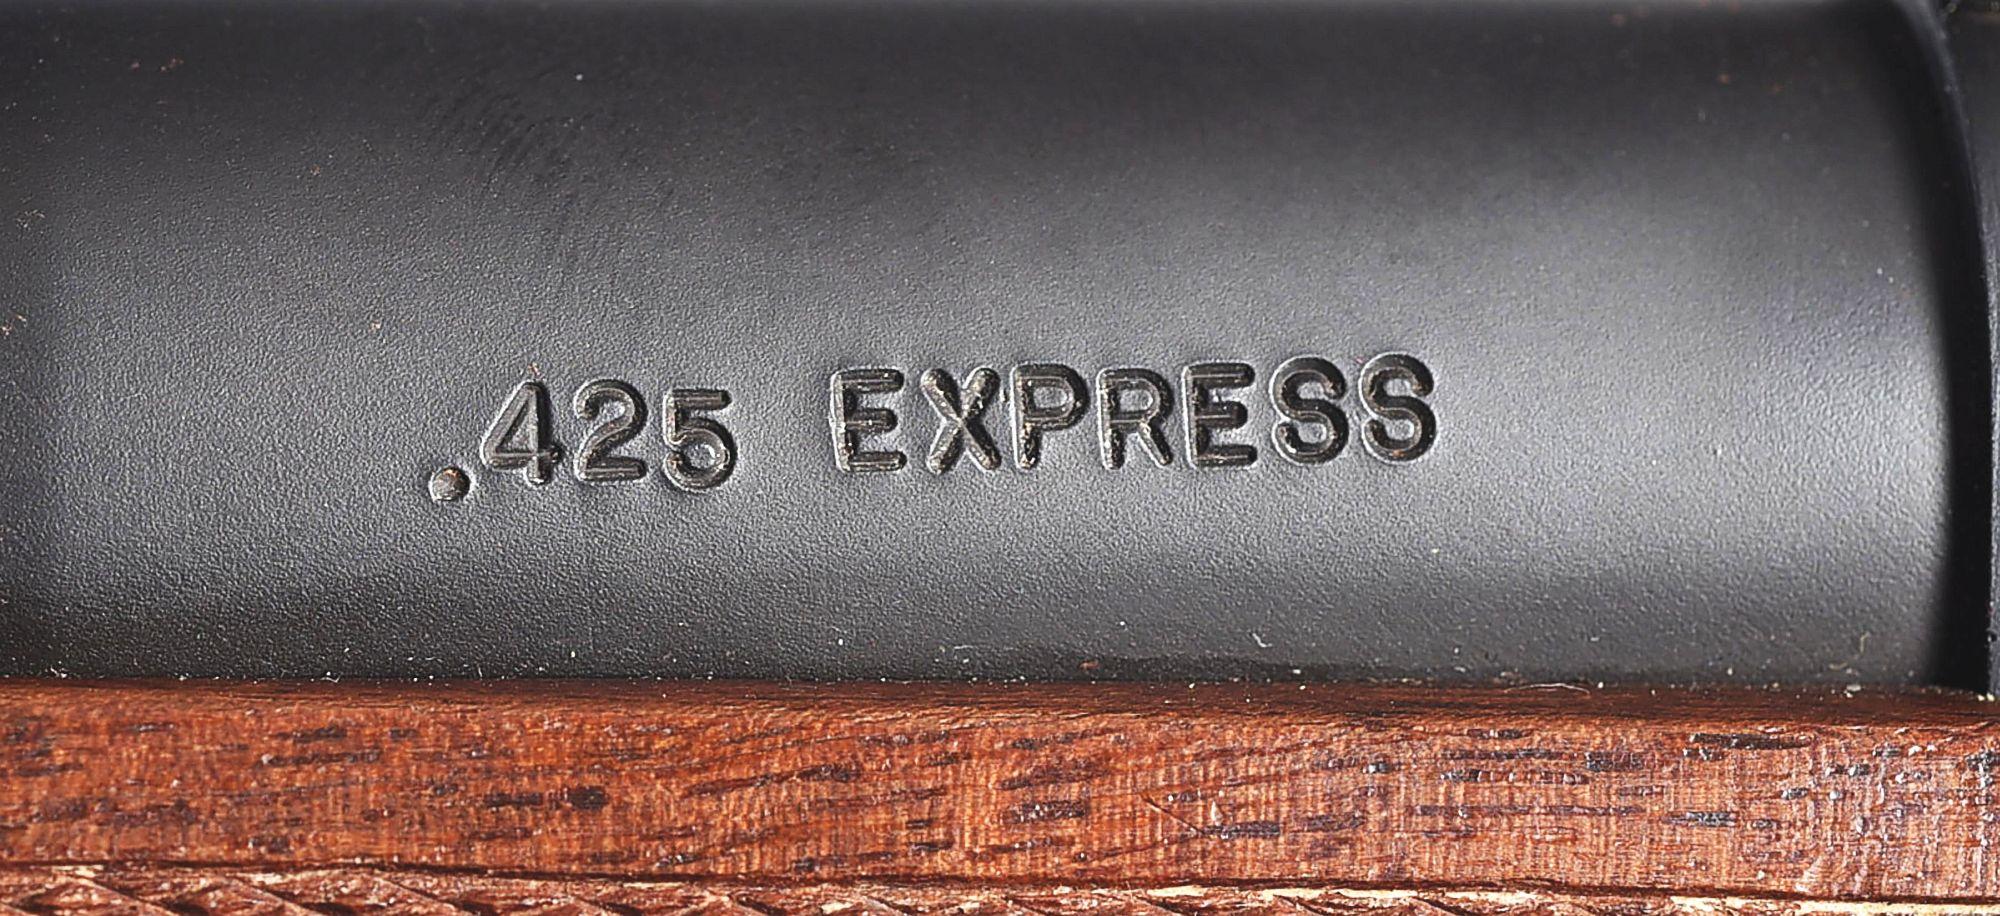 (M) A-SQUARE BOLT ACTION SAFARI RIFLE IN .425 EXPRESS